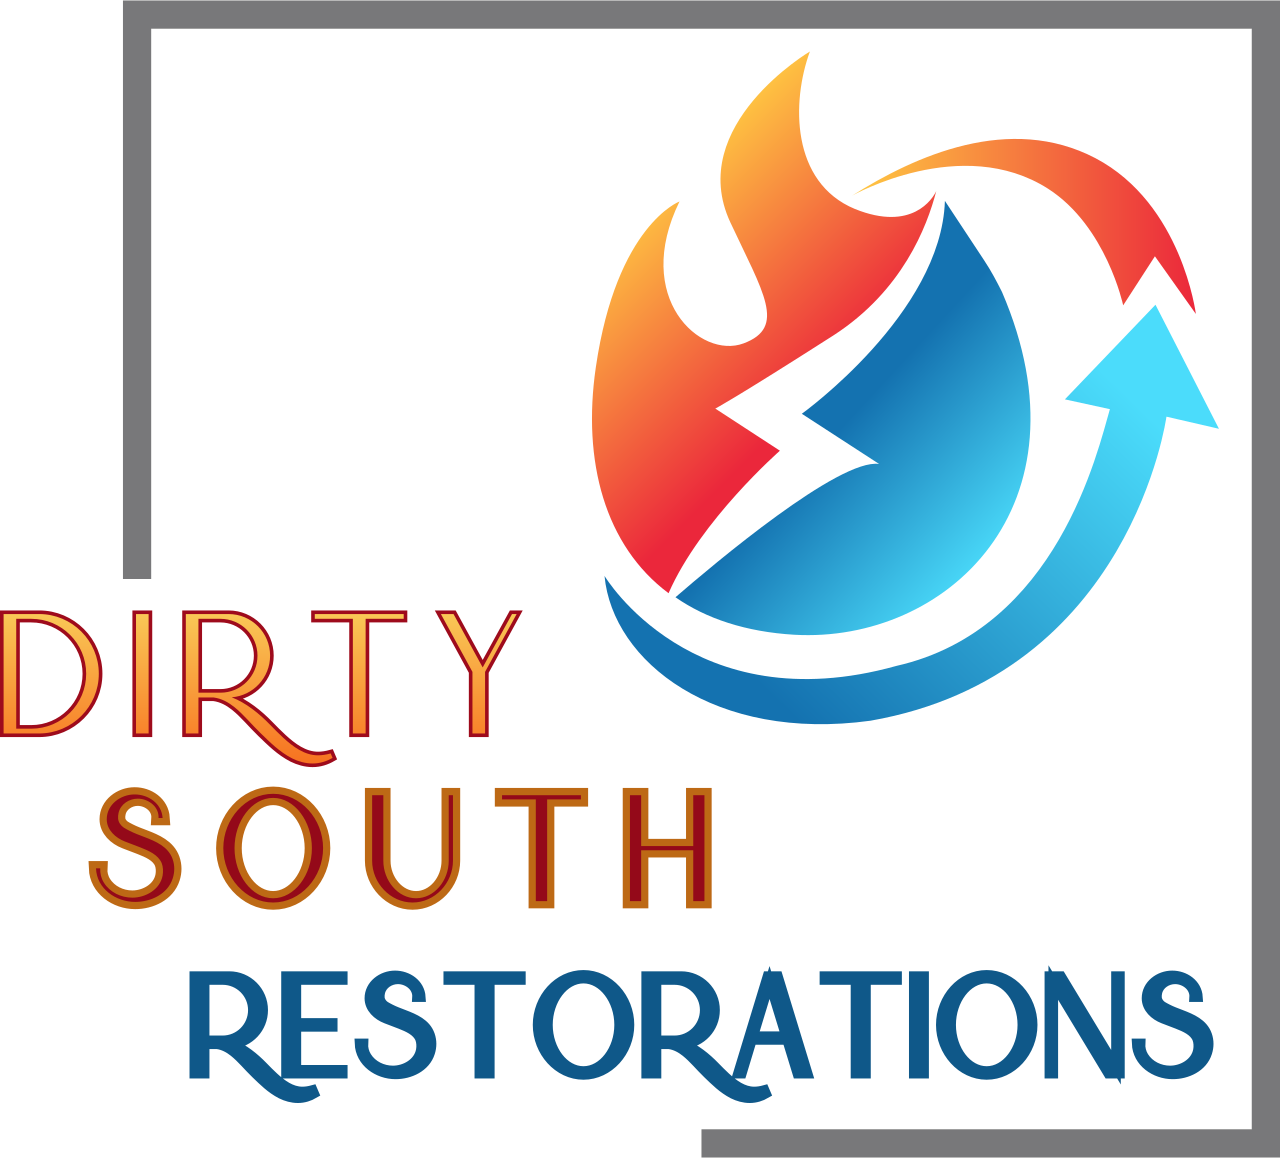 Water Fire Weather Damage Restorations Emergency Services's web page